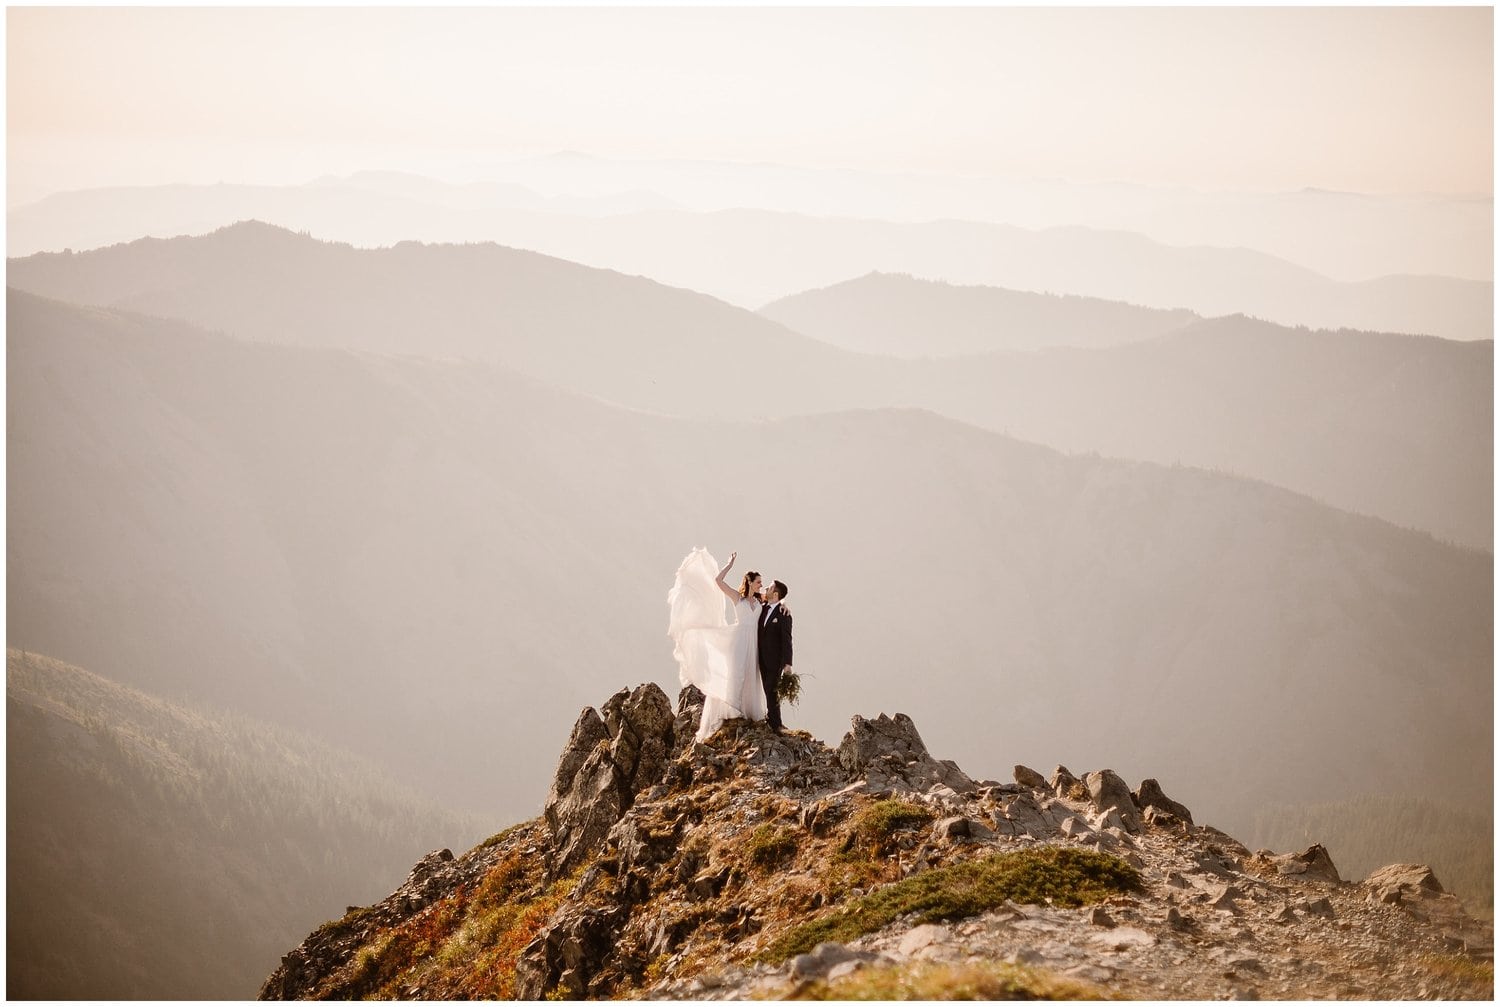 Bride and groom with their arms around each other, while standing on a mountain cliff in Washington at sunrise.